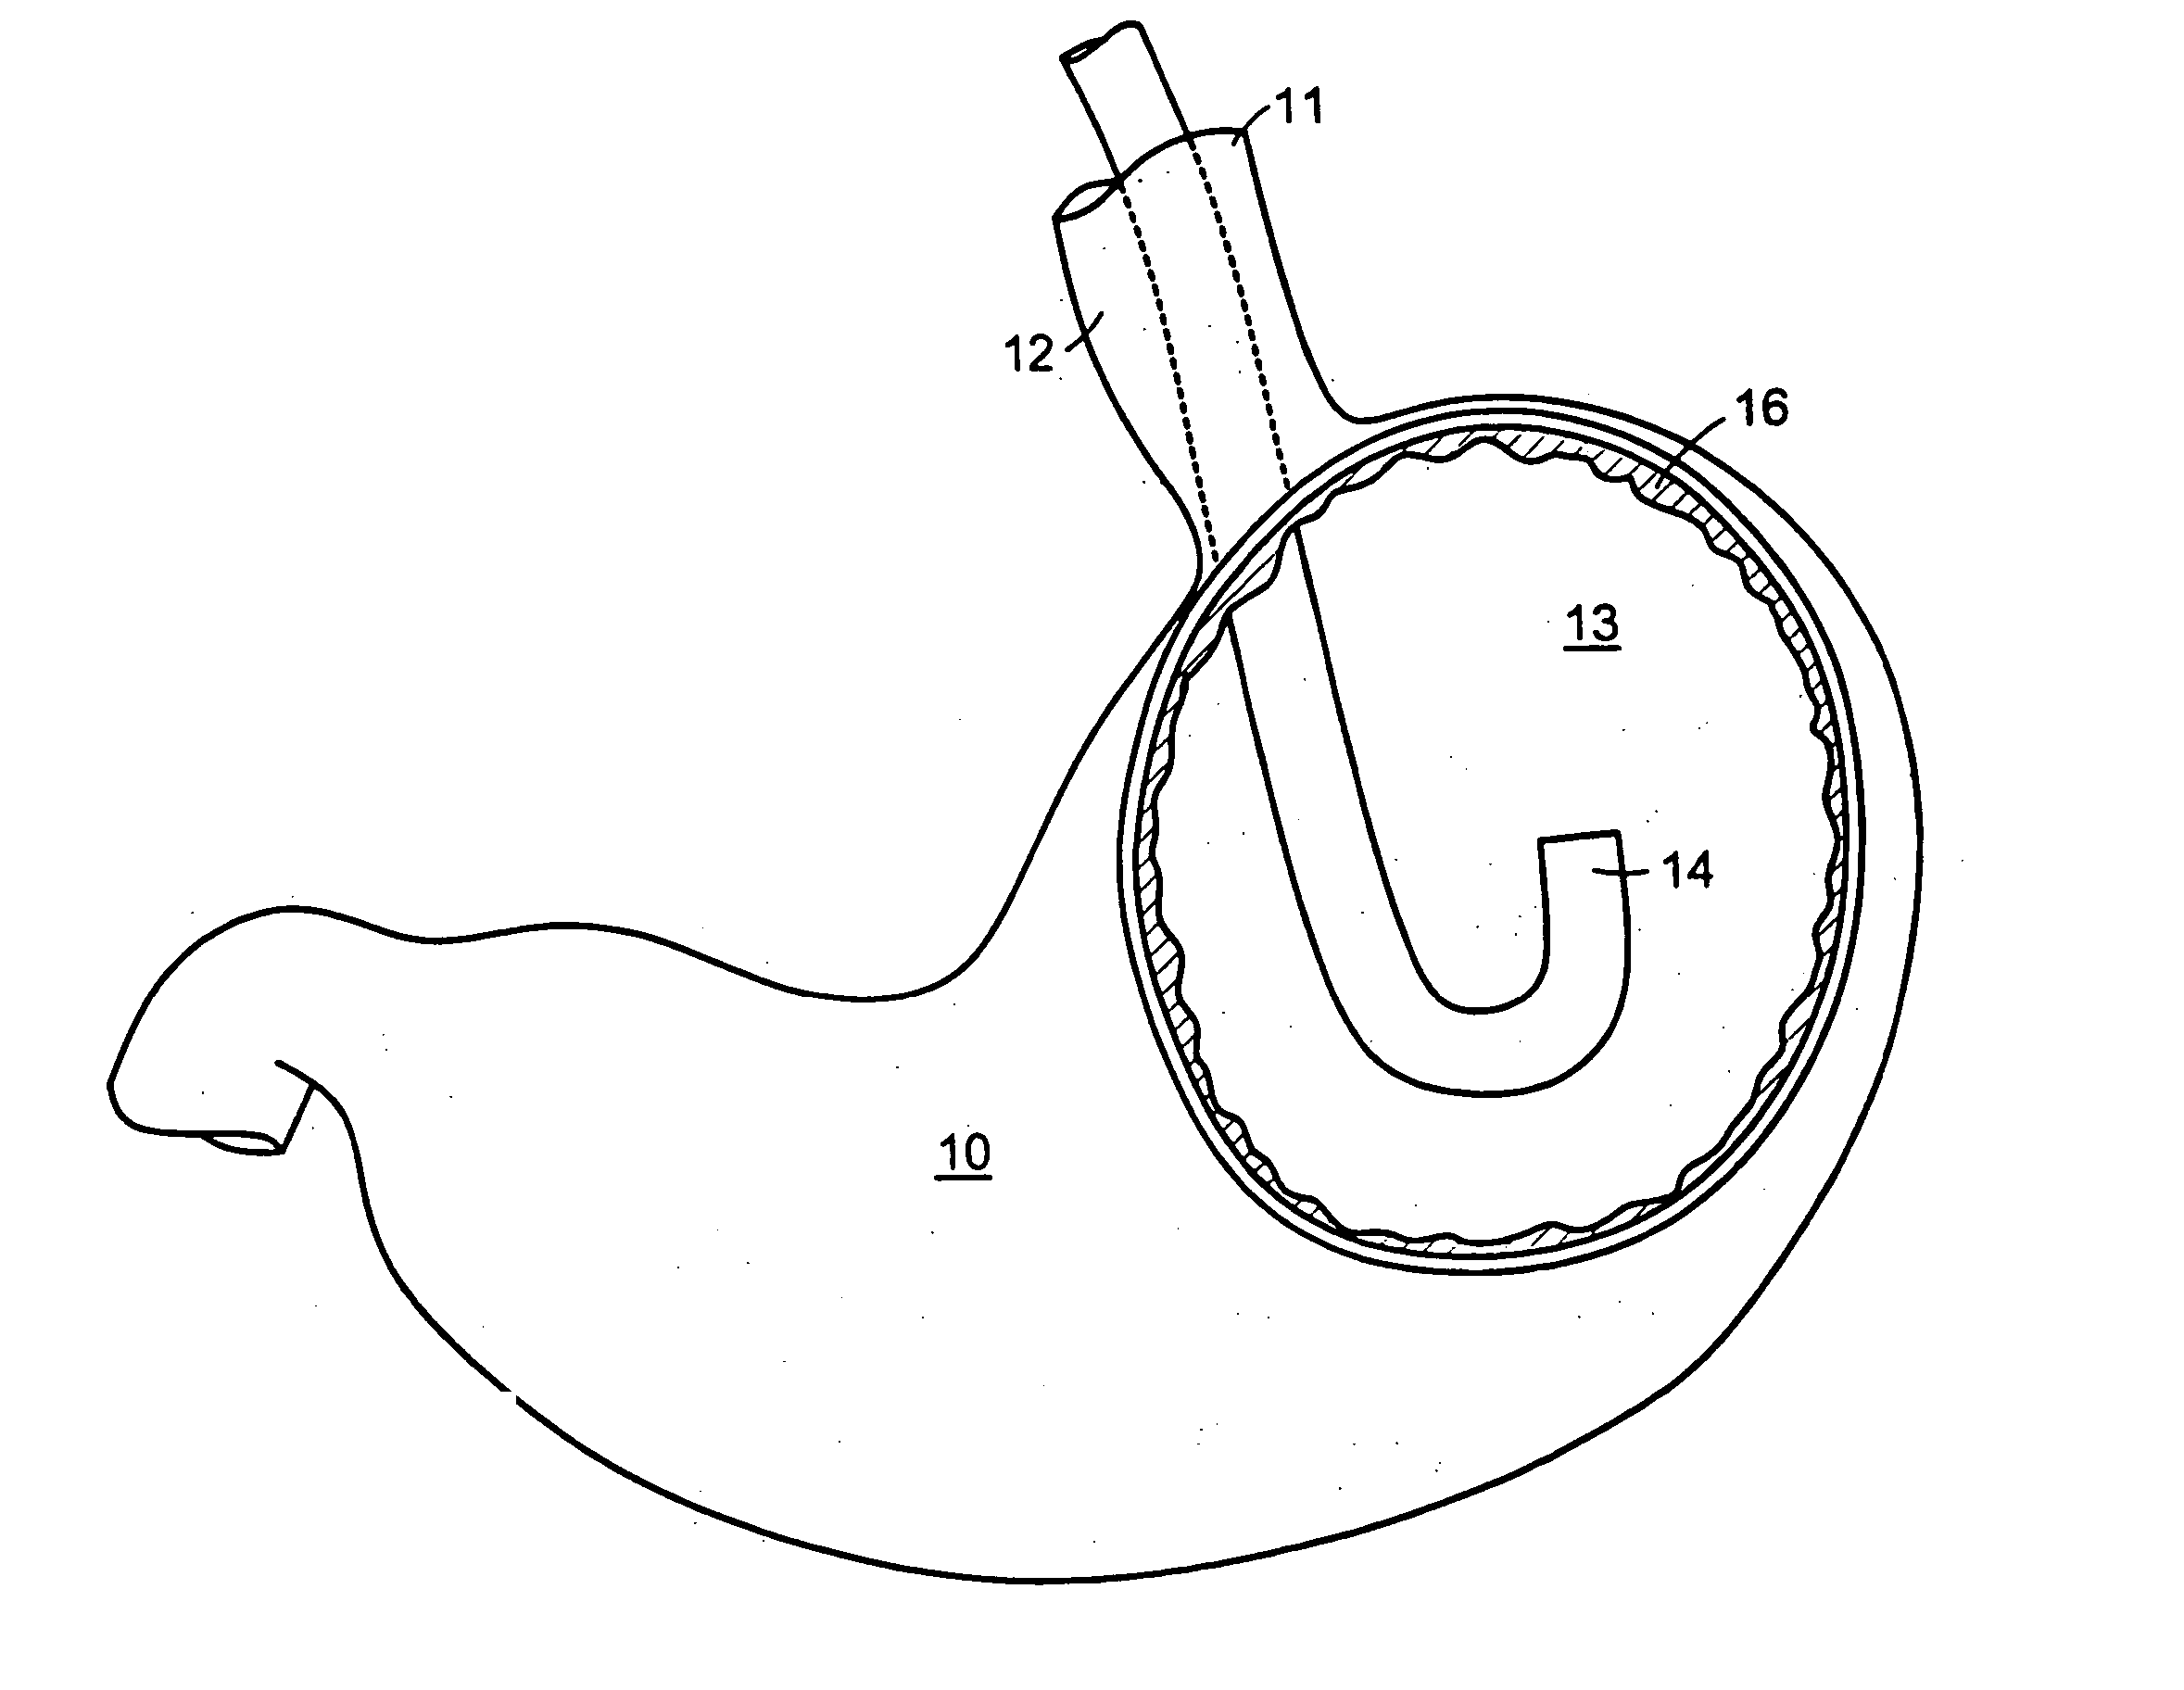 Methods and devices for tissue reconfiguration